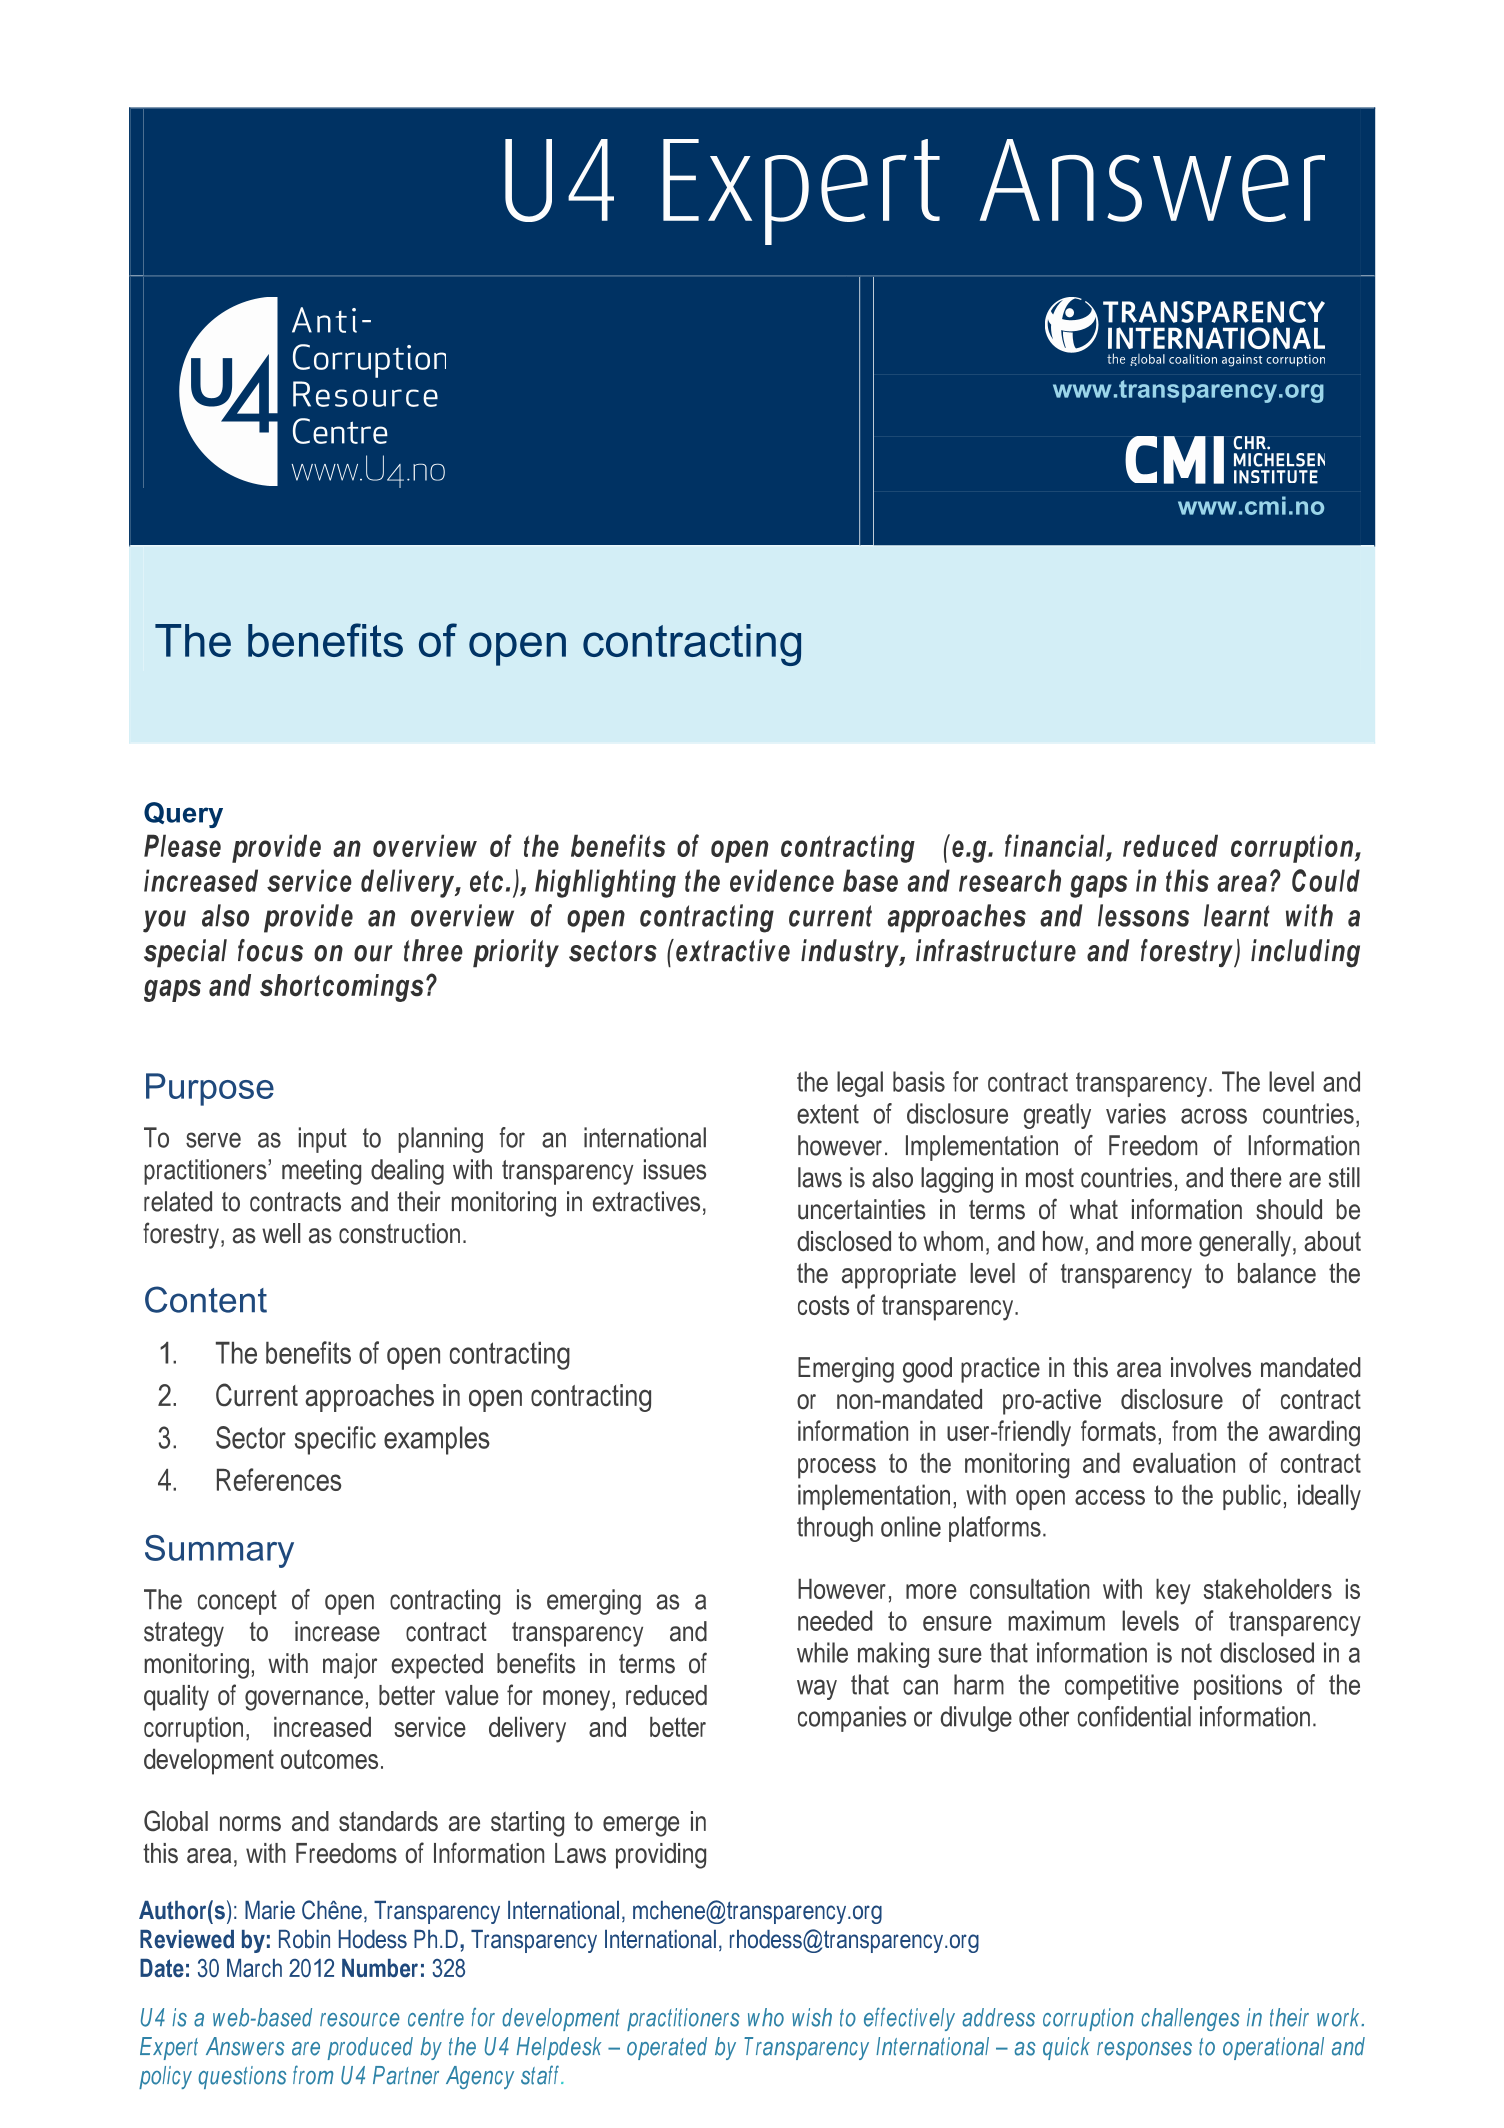 The benefits of open contracting